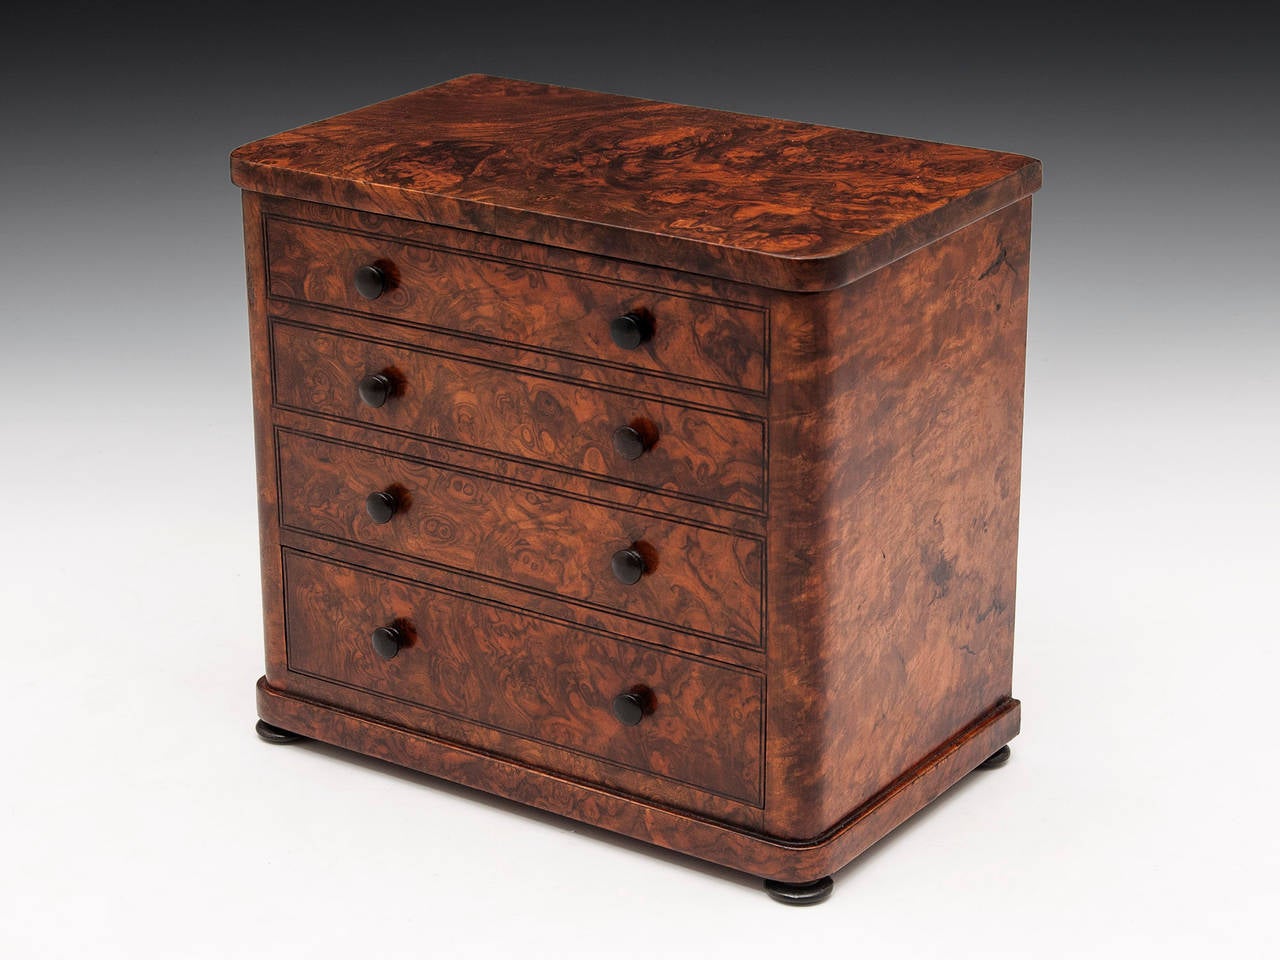 Charming Smokers’ Companion modelled as a Miniature Chest of Drawers, veneered in stunning burr walnut. It has eight turned ebony handles; one of these, when pressed, opens the sprung hinged top to reveal three compartments for cigars and tobacco.